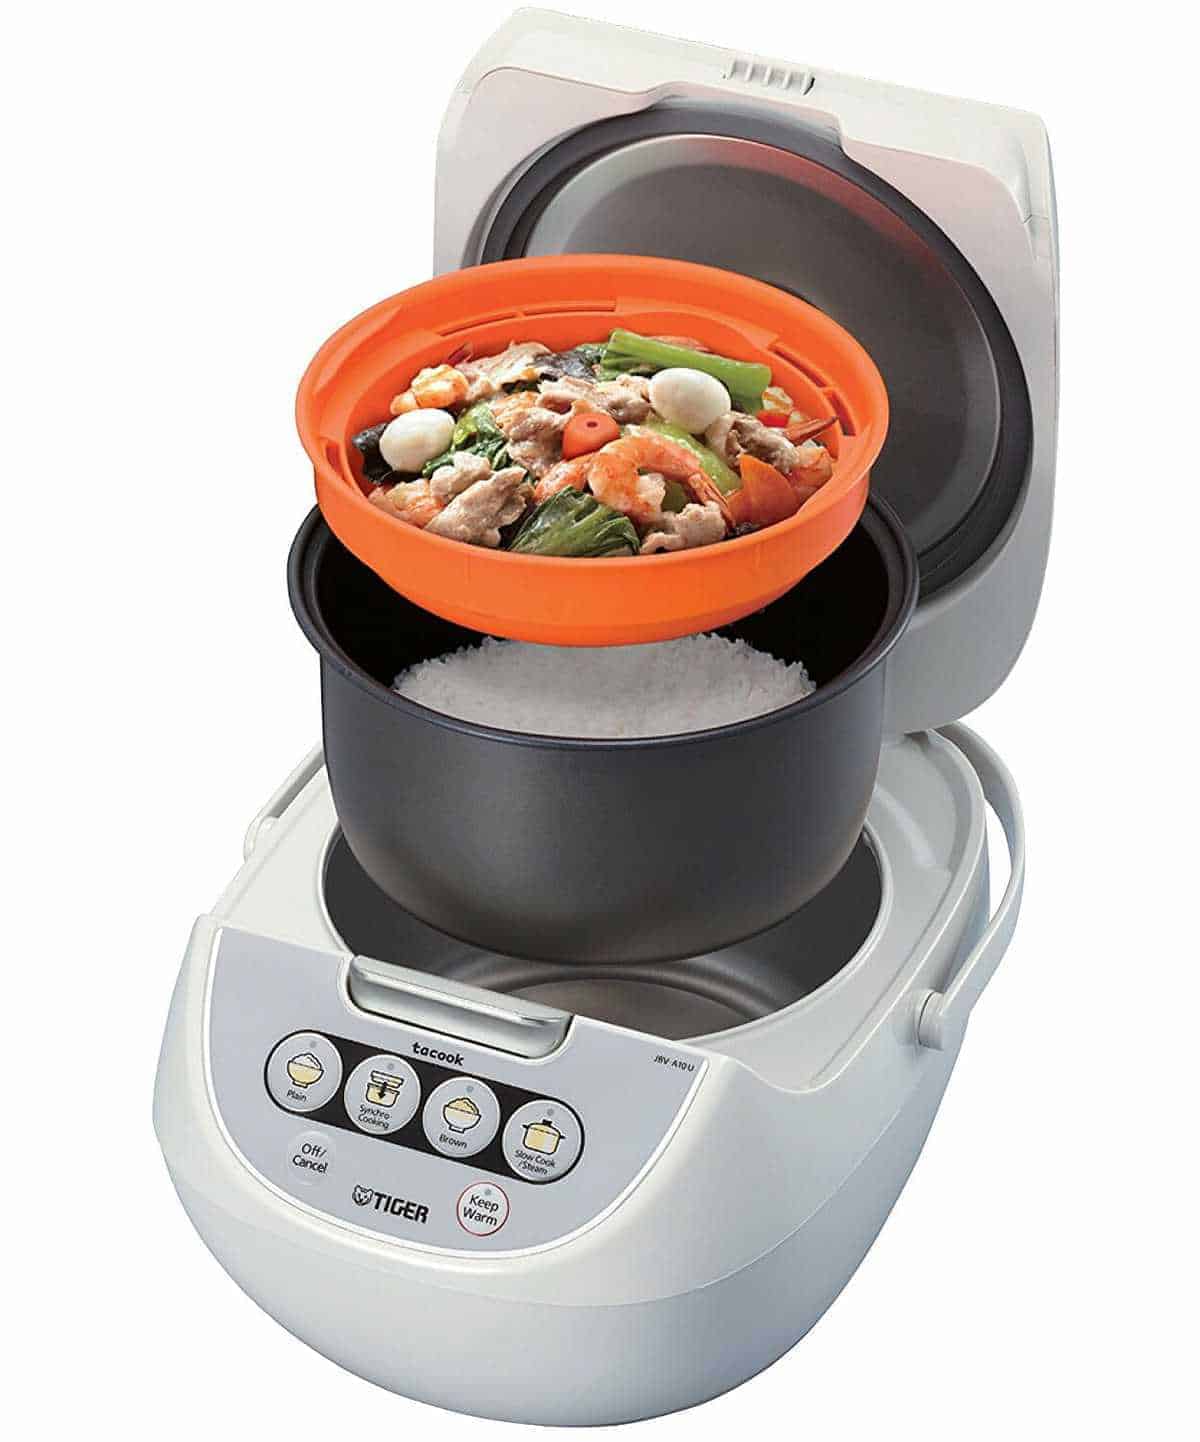 Tiger Rice Cooker and Slow Cooker Giveaway